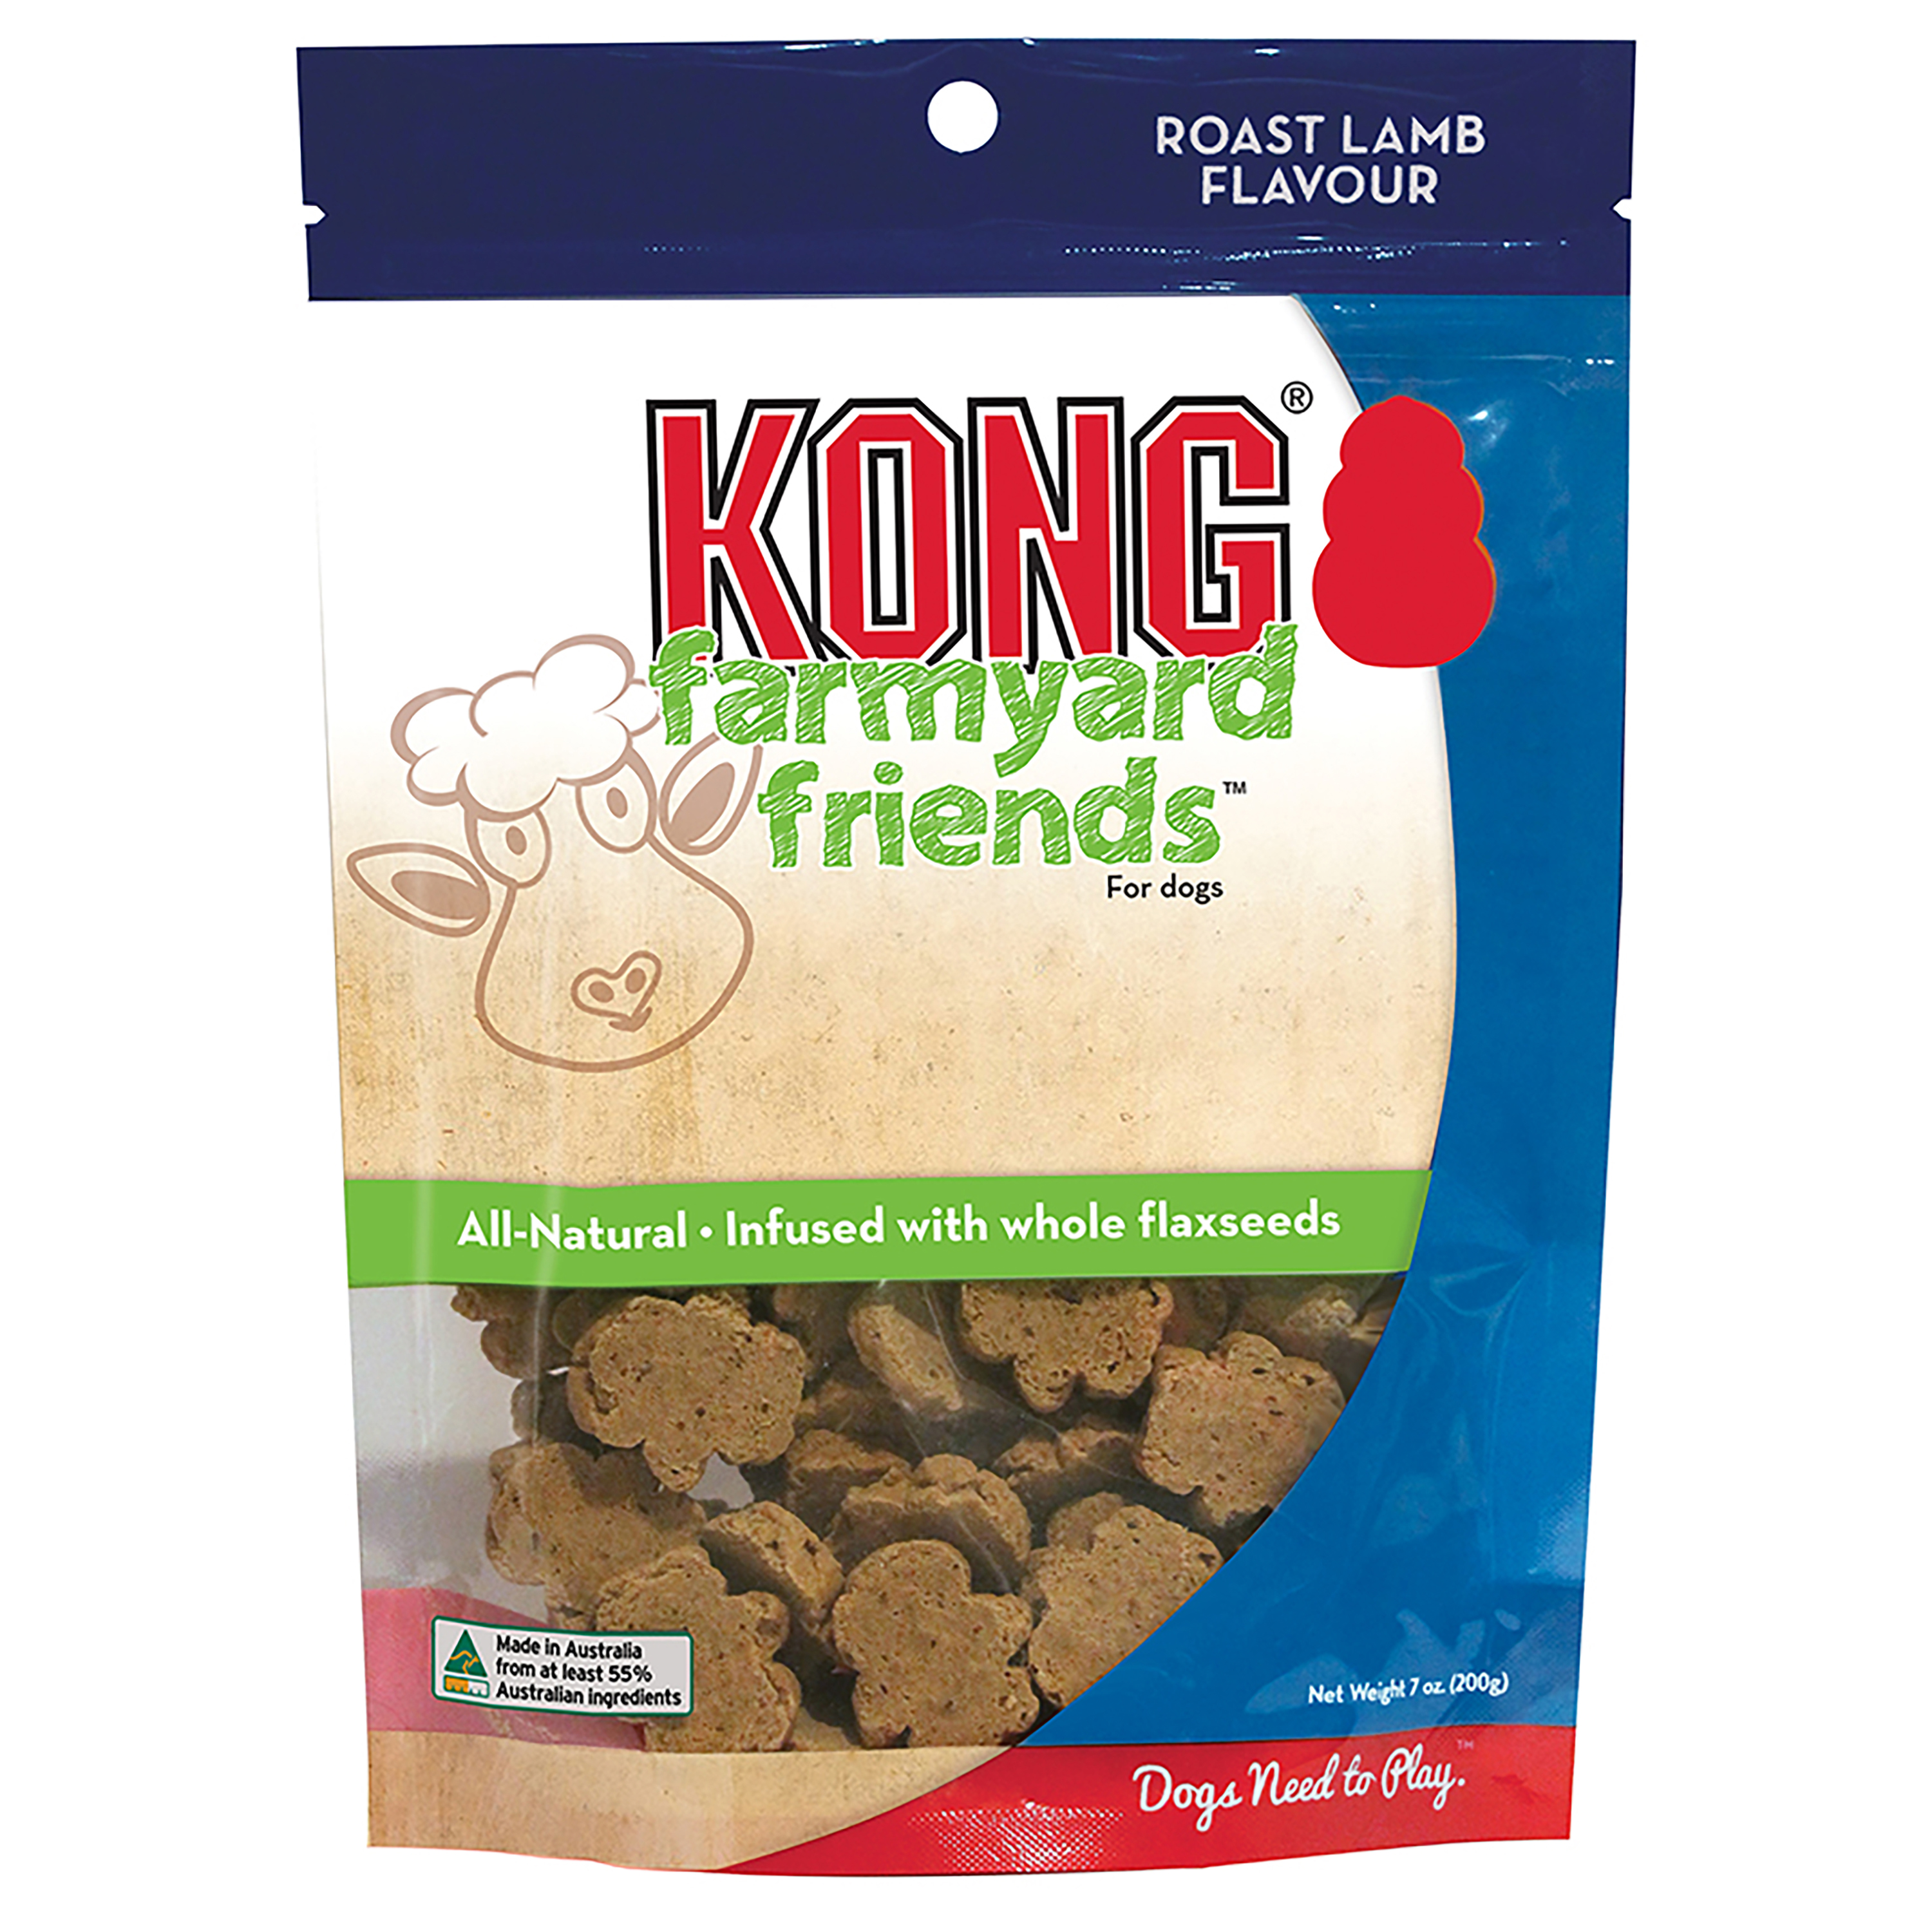 Variety Pack - KONG Stuff'N Easy Treat Liver Recipe, Peanut Butter Recipe,  Pepperoni Recipe and Bacon & Cheese Flavors 